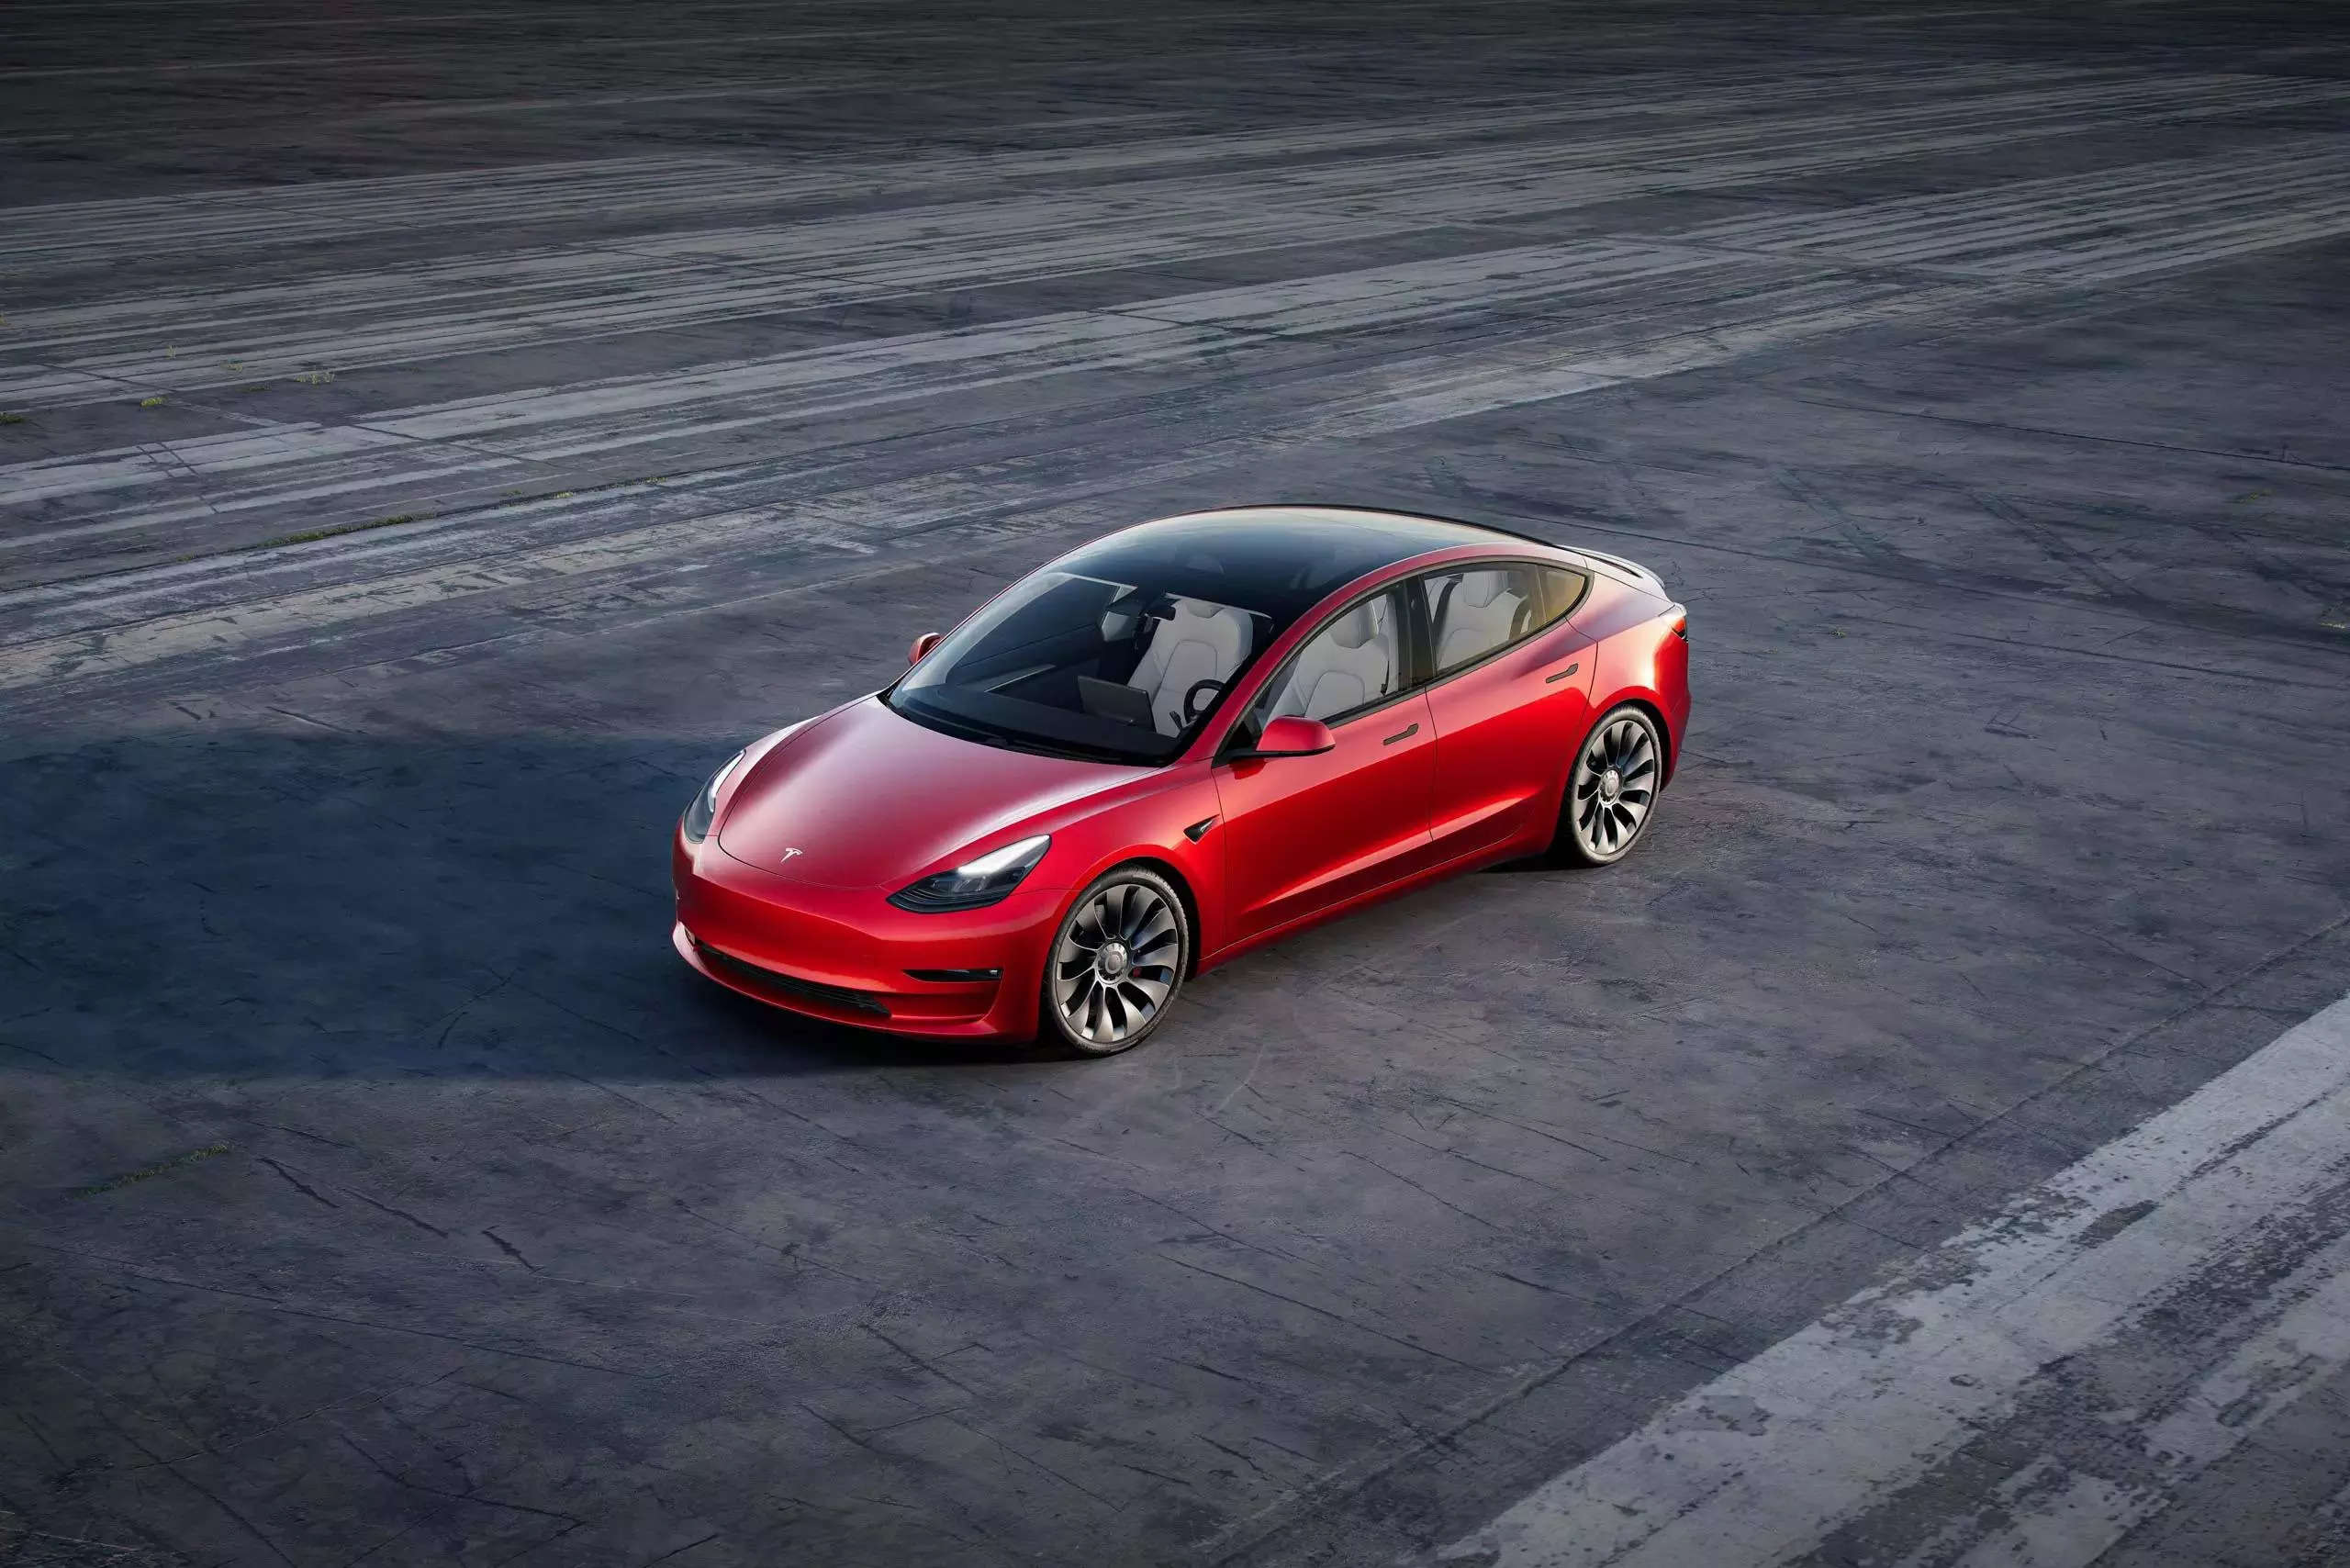 Kaal grot pensioen Tesla: Tesla raises prices for all vehicles except Model 3 in US - Times of  India